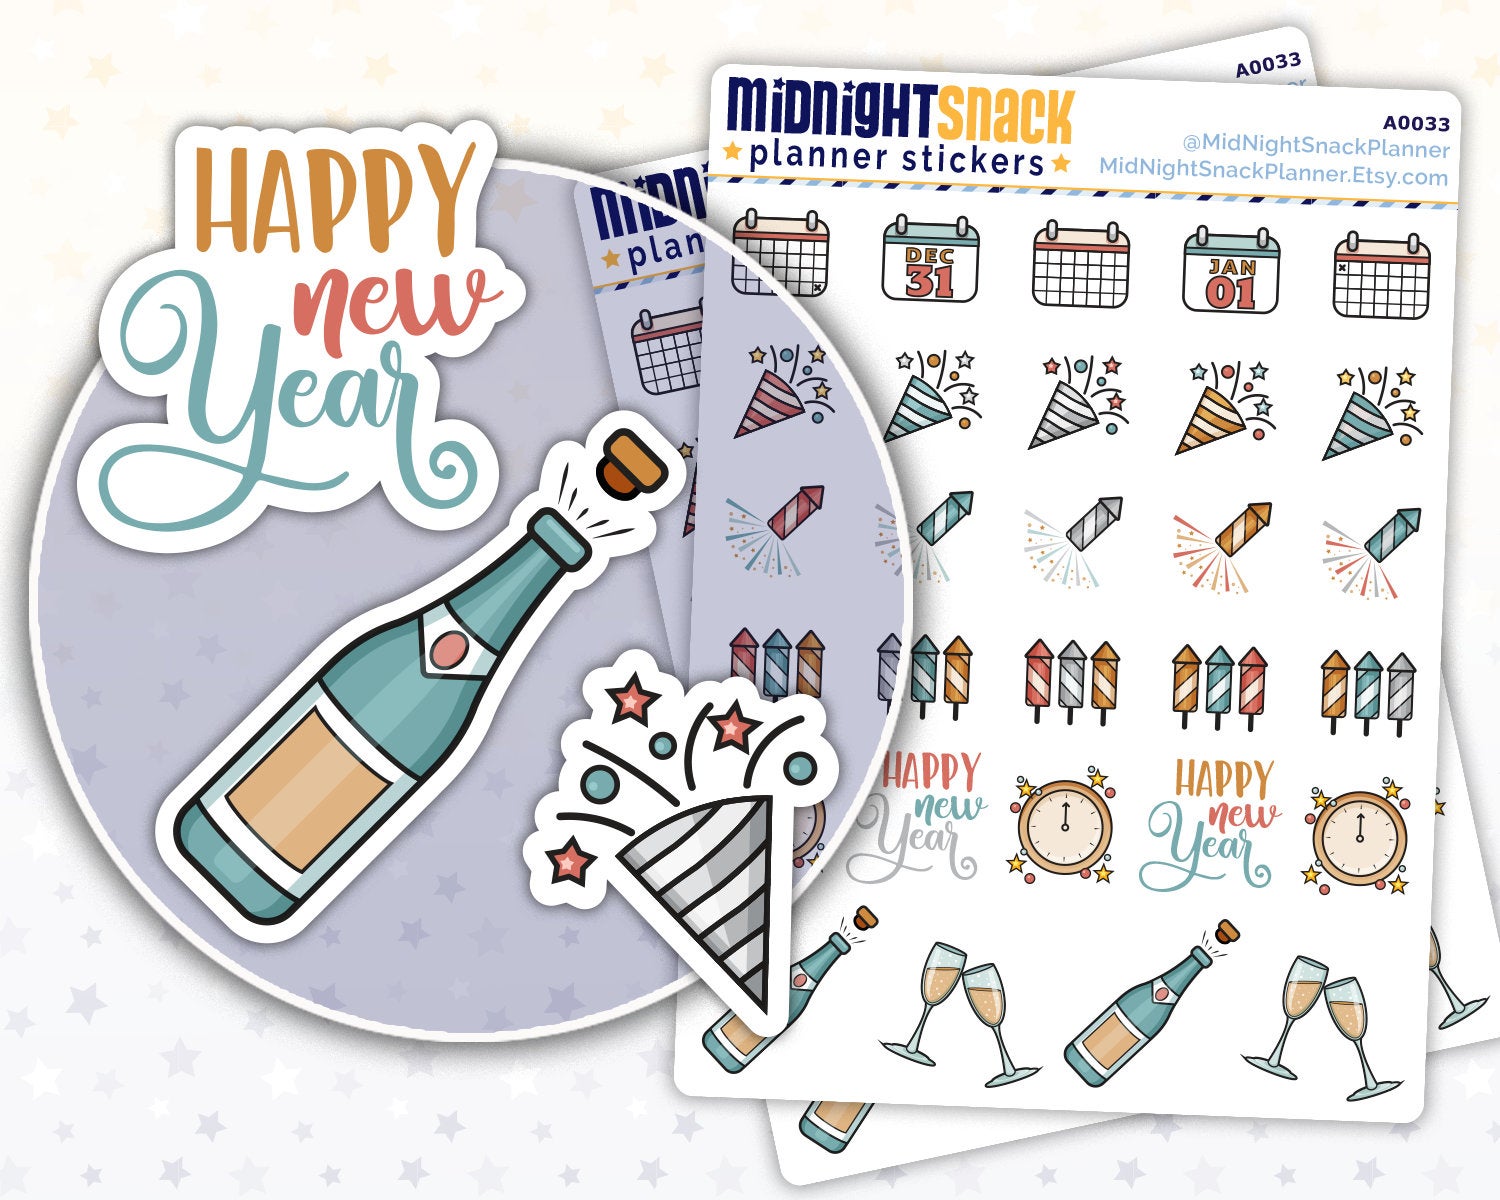 New Year’s Eve Sampler Planner Stickers Midnight Snack Planner